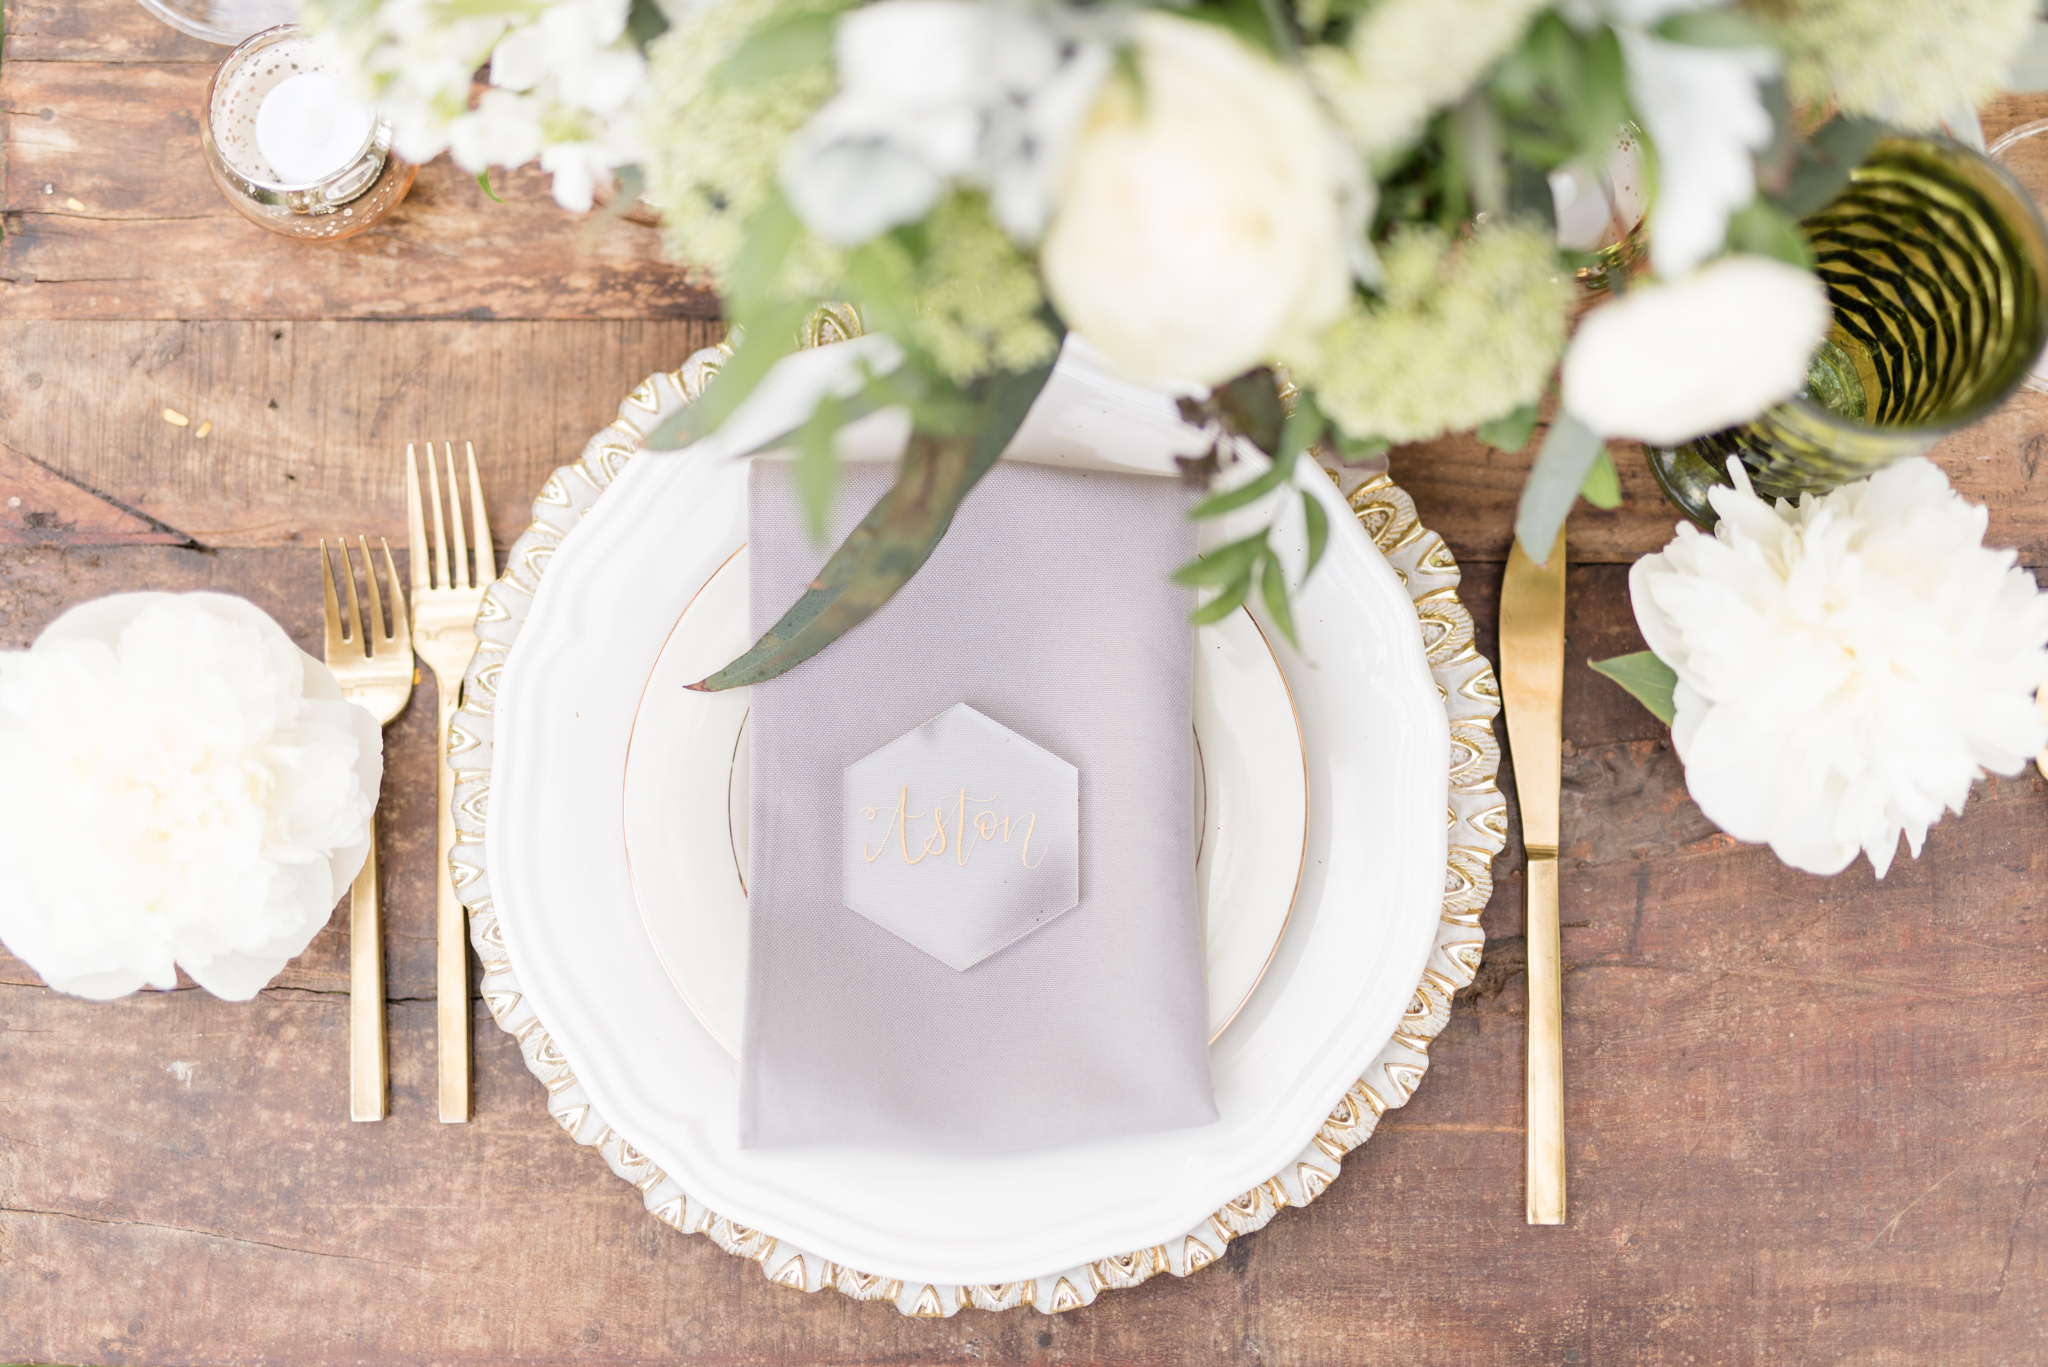 Luxury Wedding place settings with gold utensils